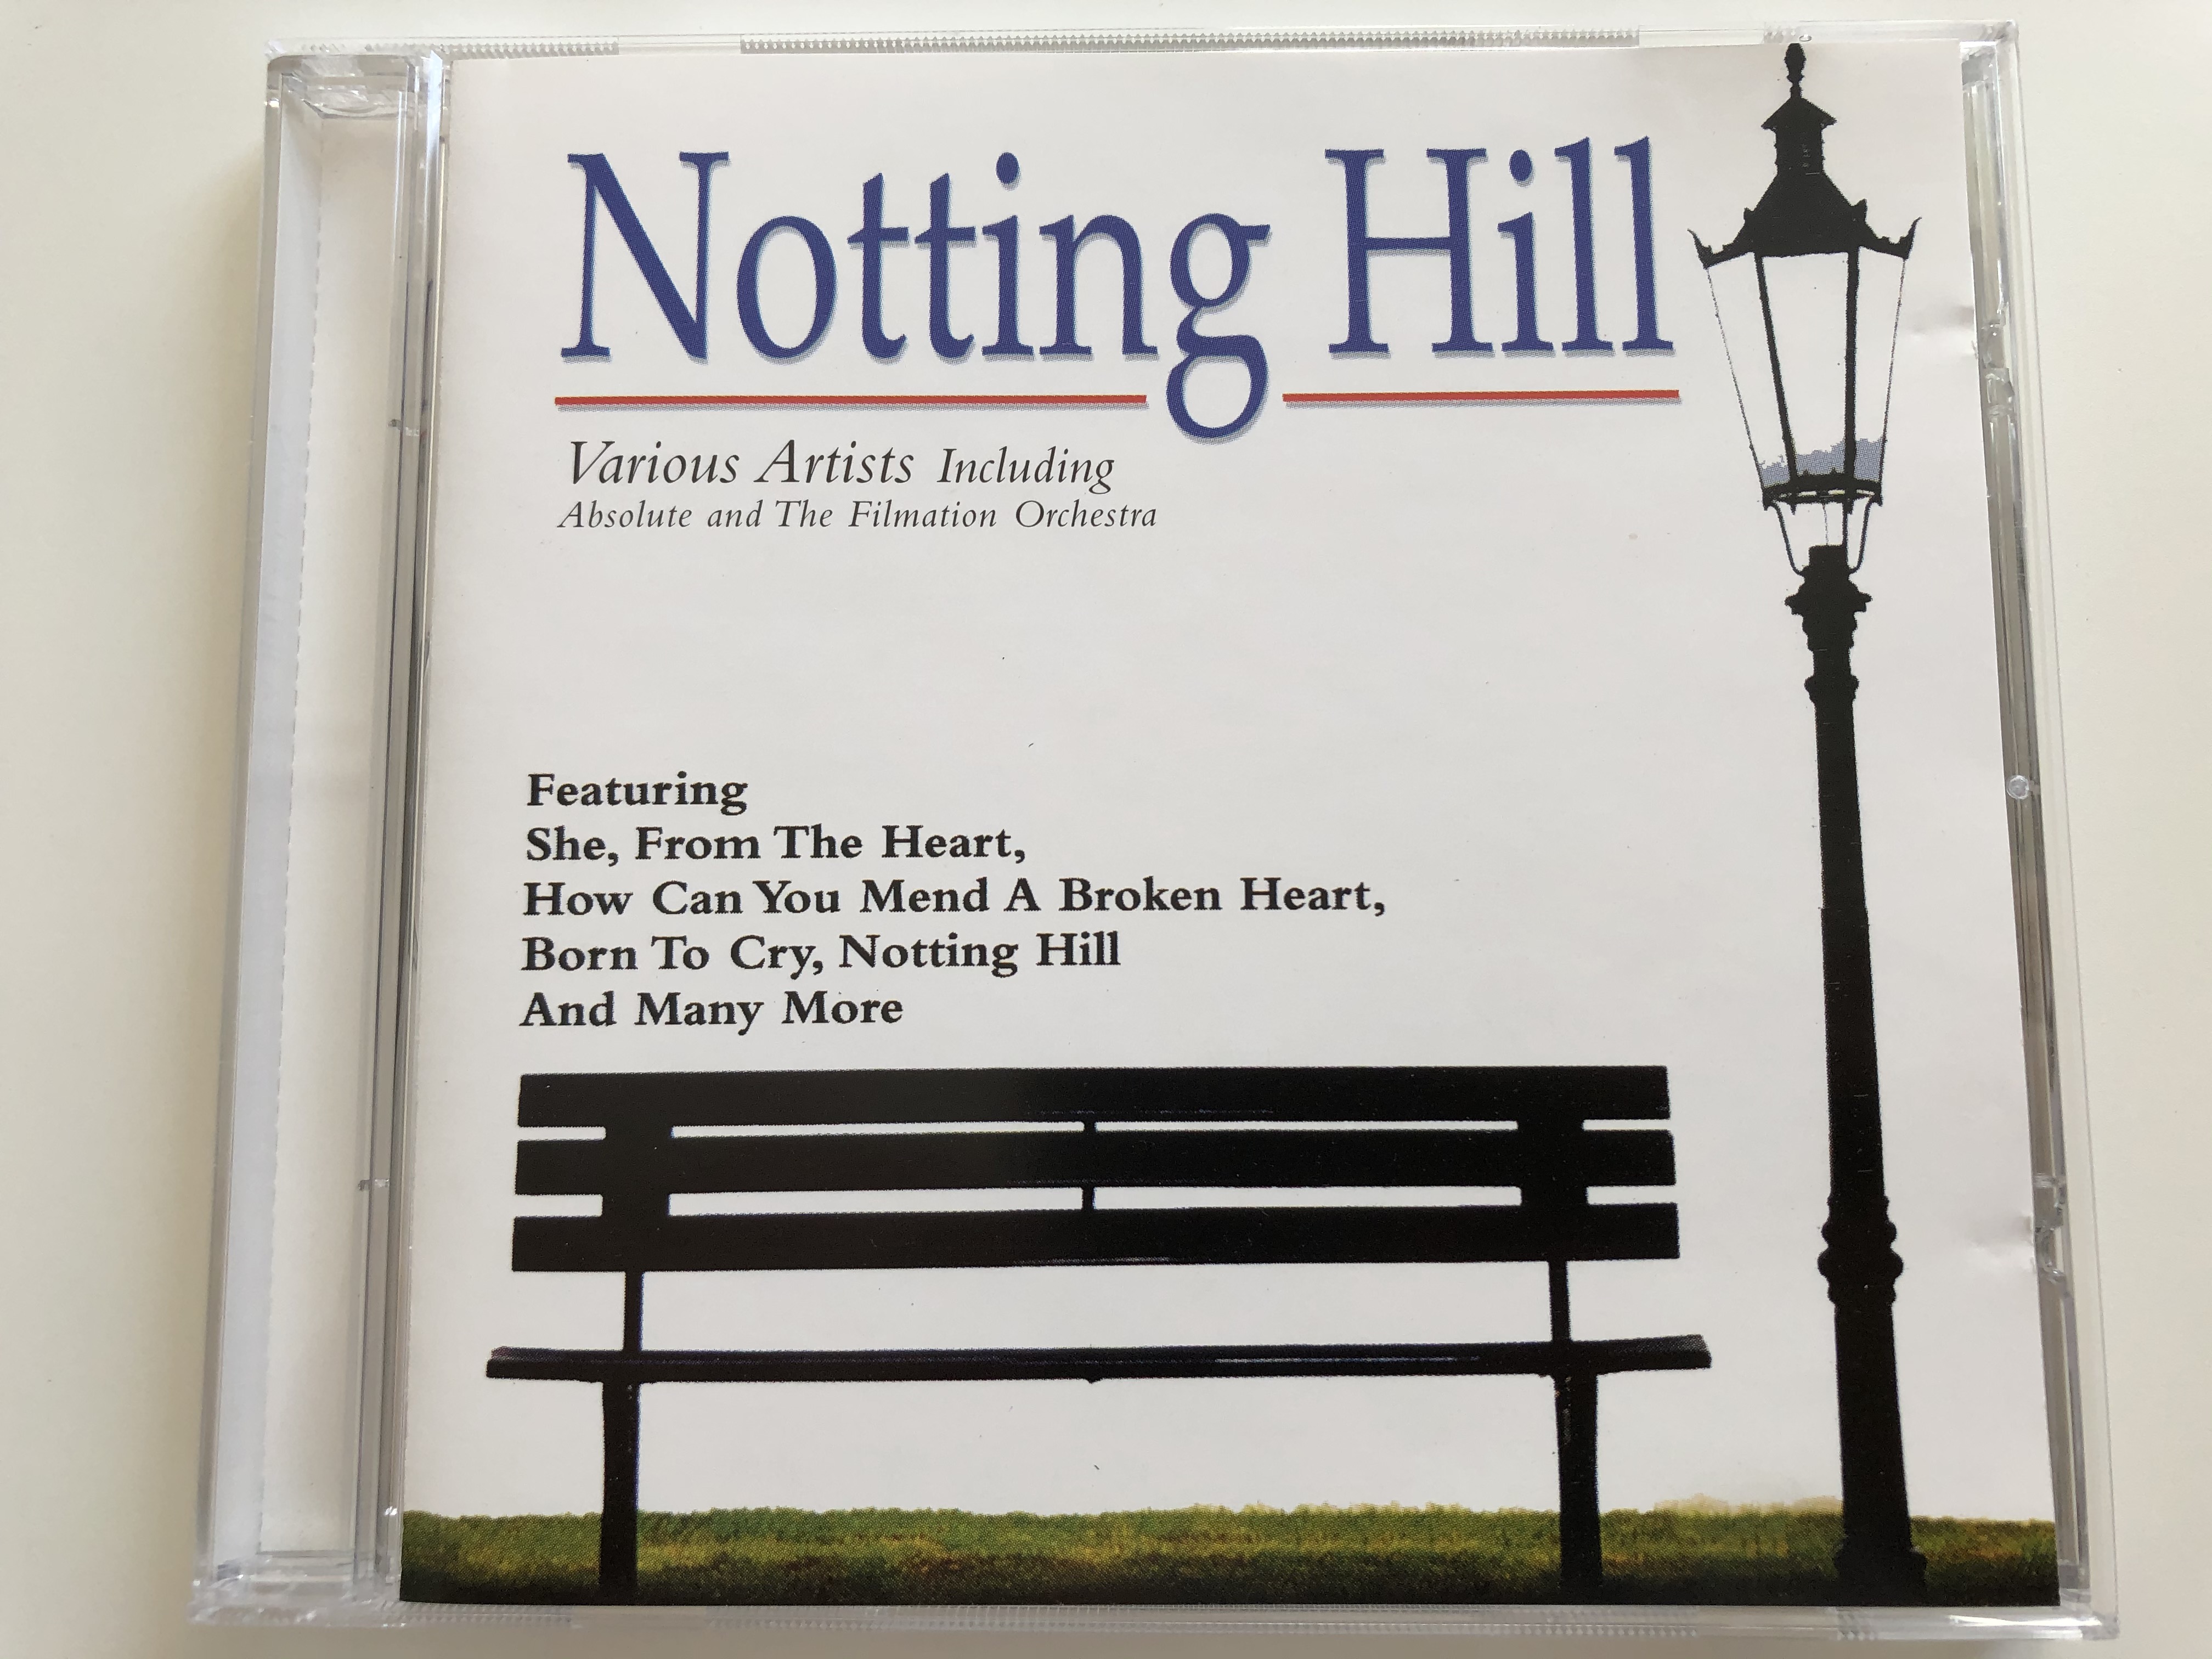 notting-hill-various-artists-including-absolute-and-the-filmation-orchestra-featuring-she-from-the-heart-how-can-you-mend-a-broken-heart-born-to-cry-nothing-hill-and-many-more-cosmopolitan-1-.jpg